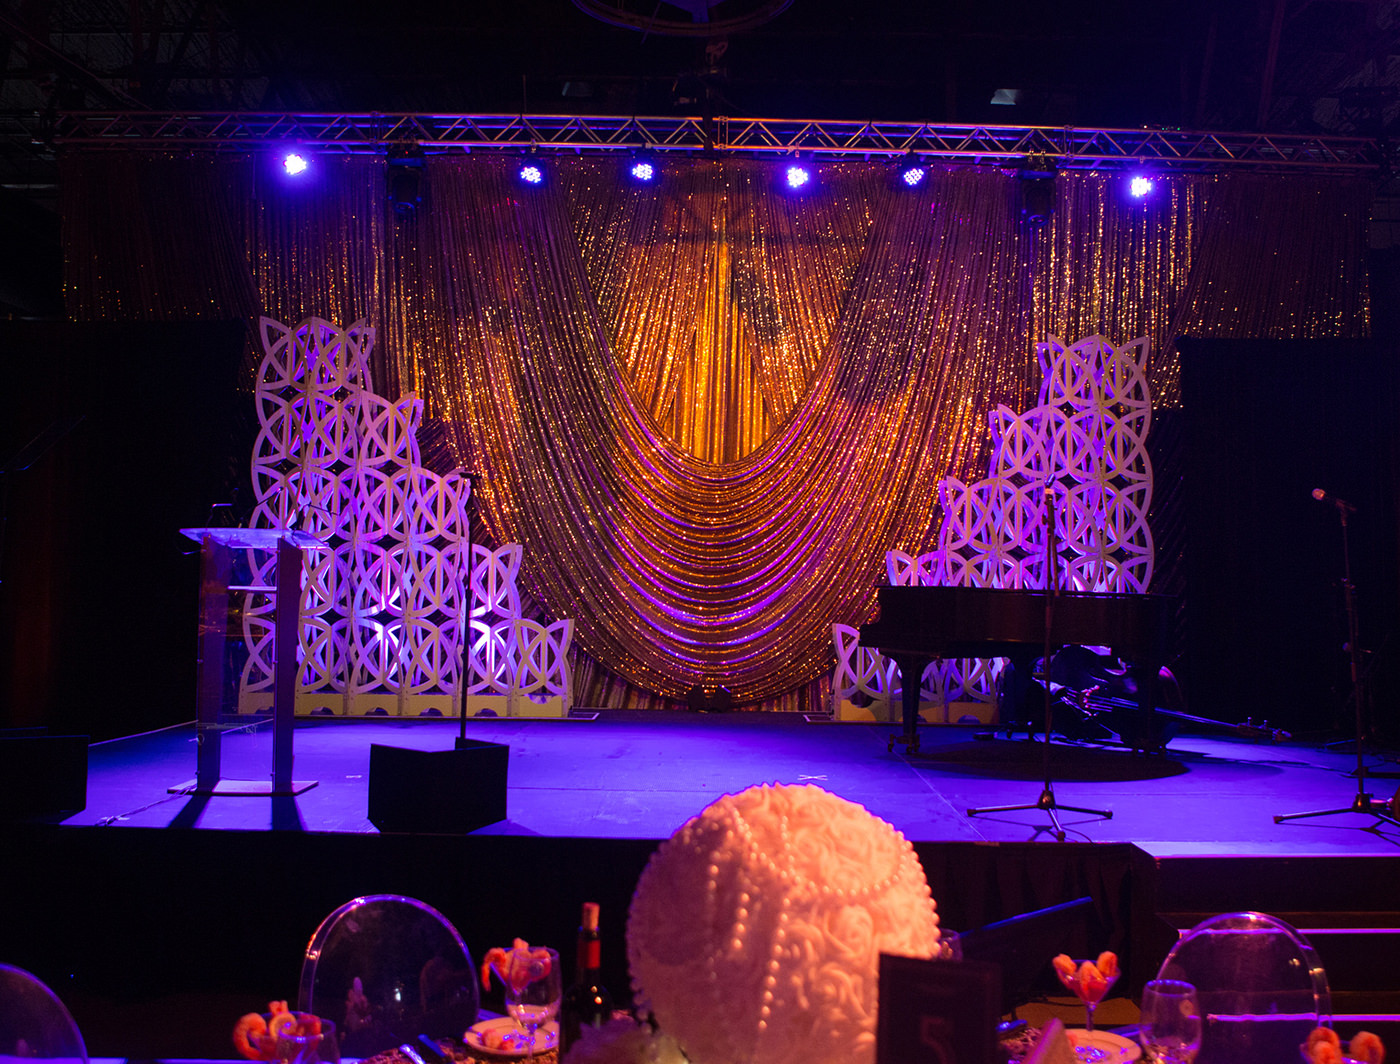 GOLD SPARKLE DOT ON STAGE BEHIND KNOT PANELS